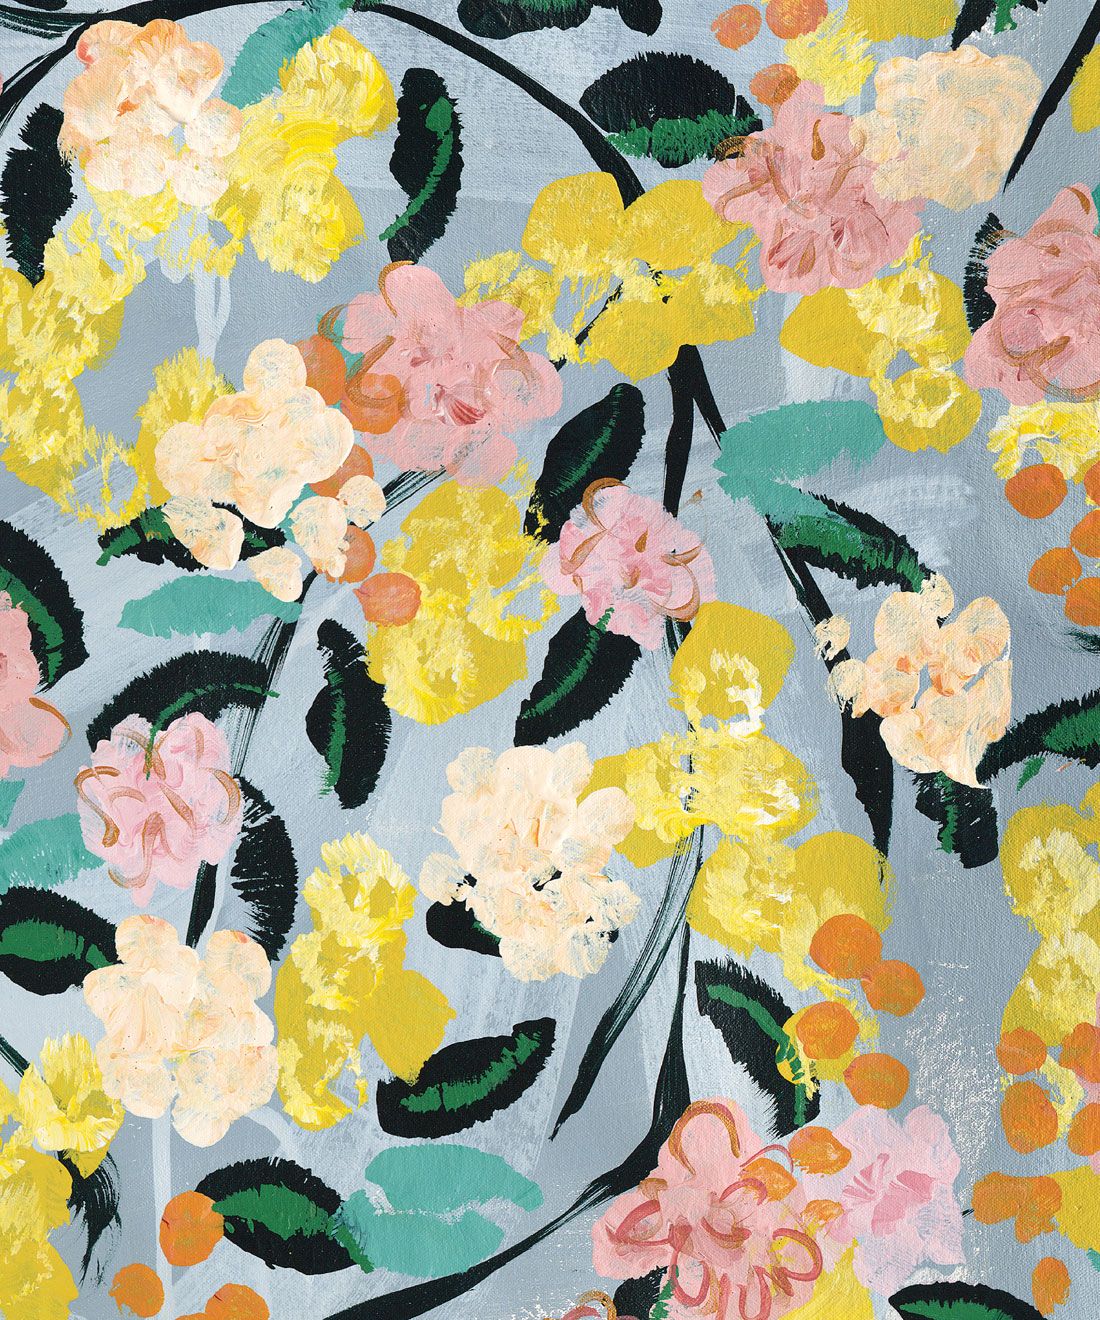 Blossom Wallpaper • Colourful Floral Wallpaper • Tiff Manuell • Abstract Expressionist Wallpaper • Swatch